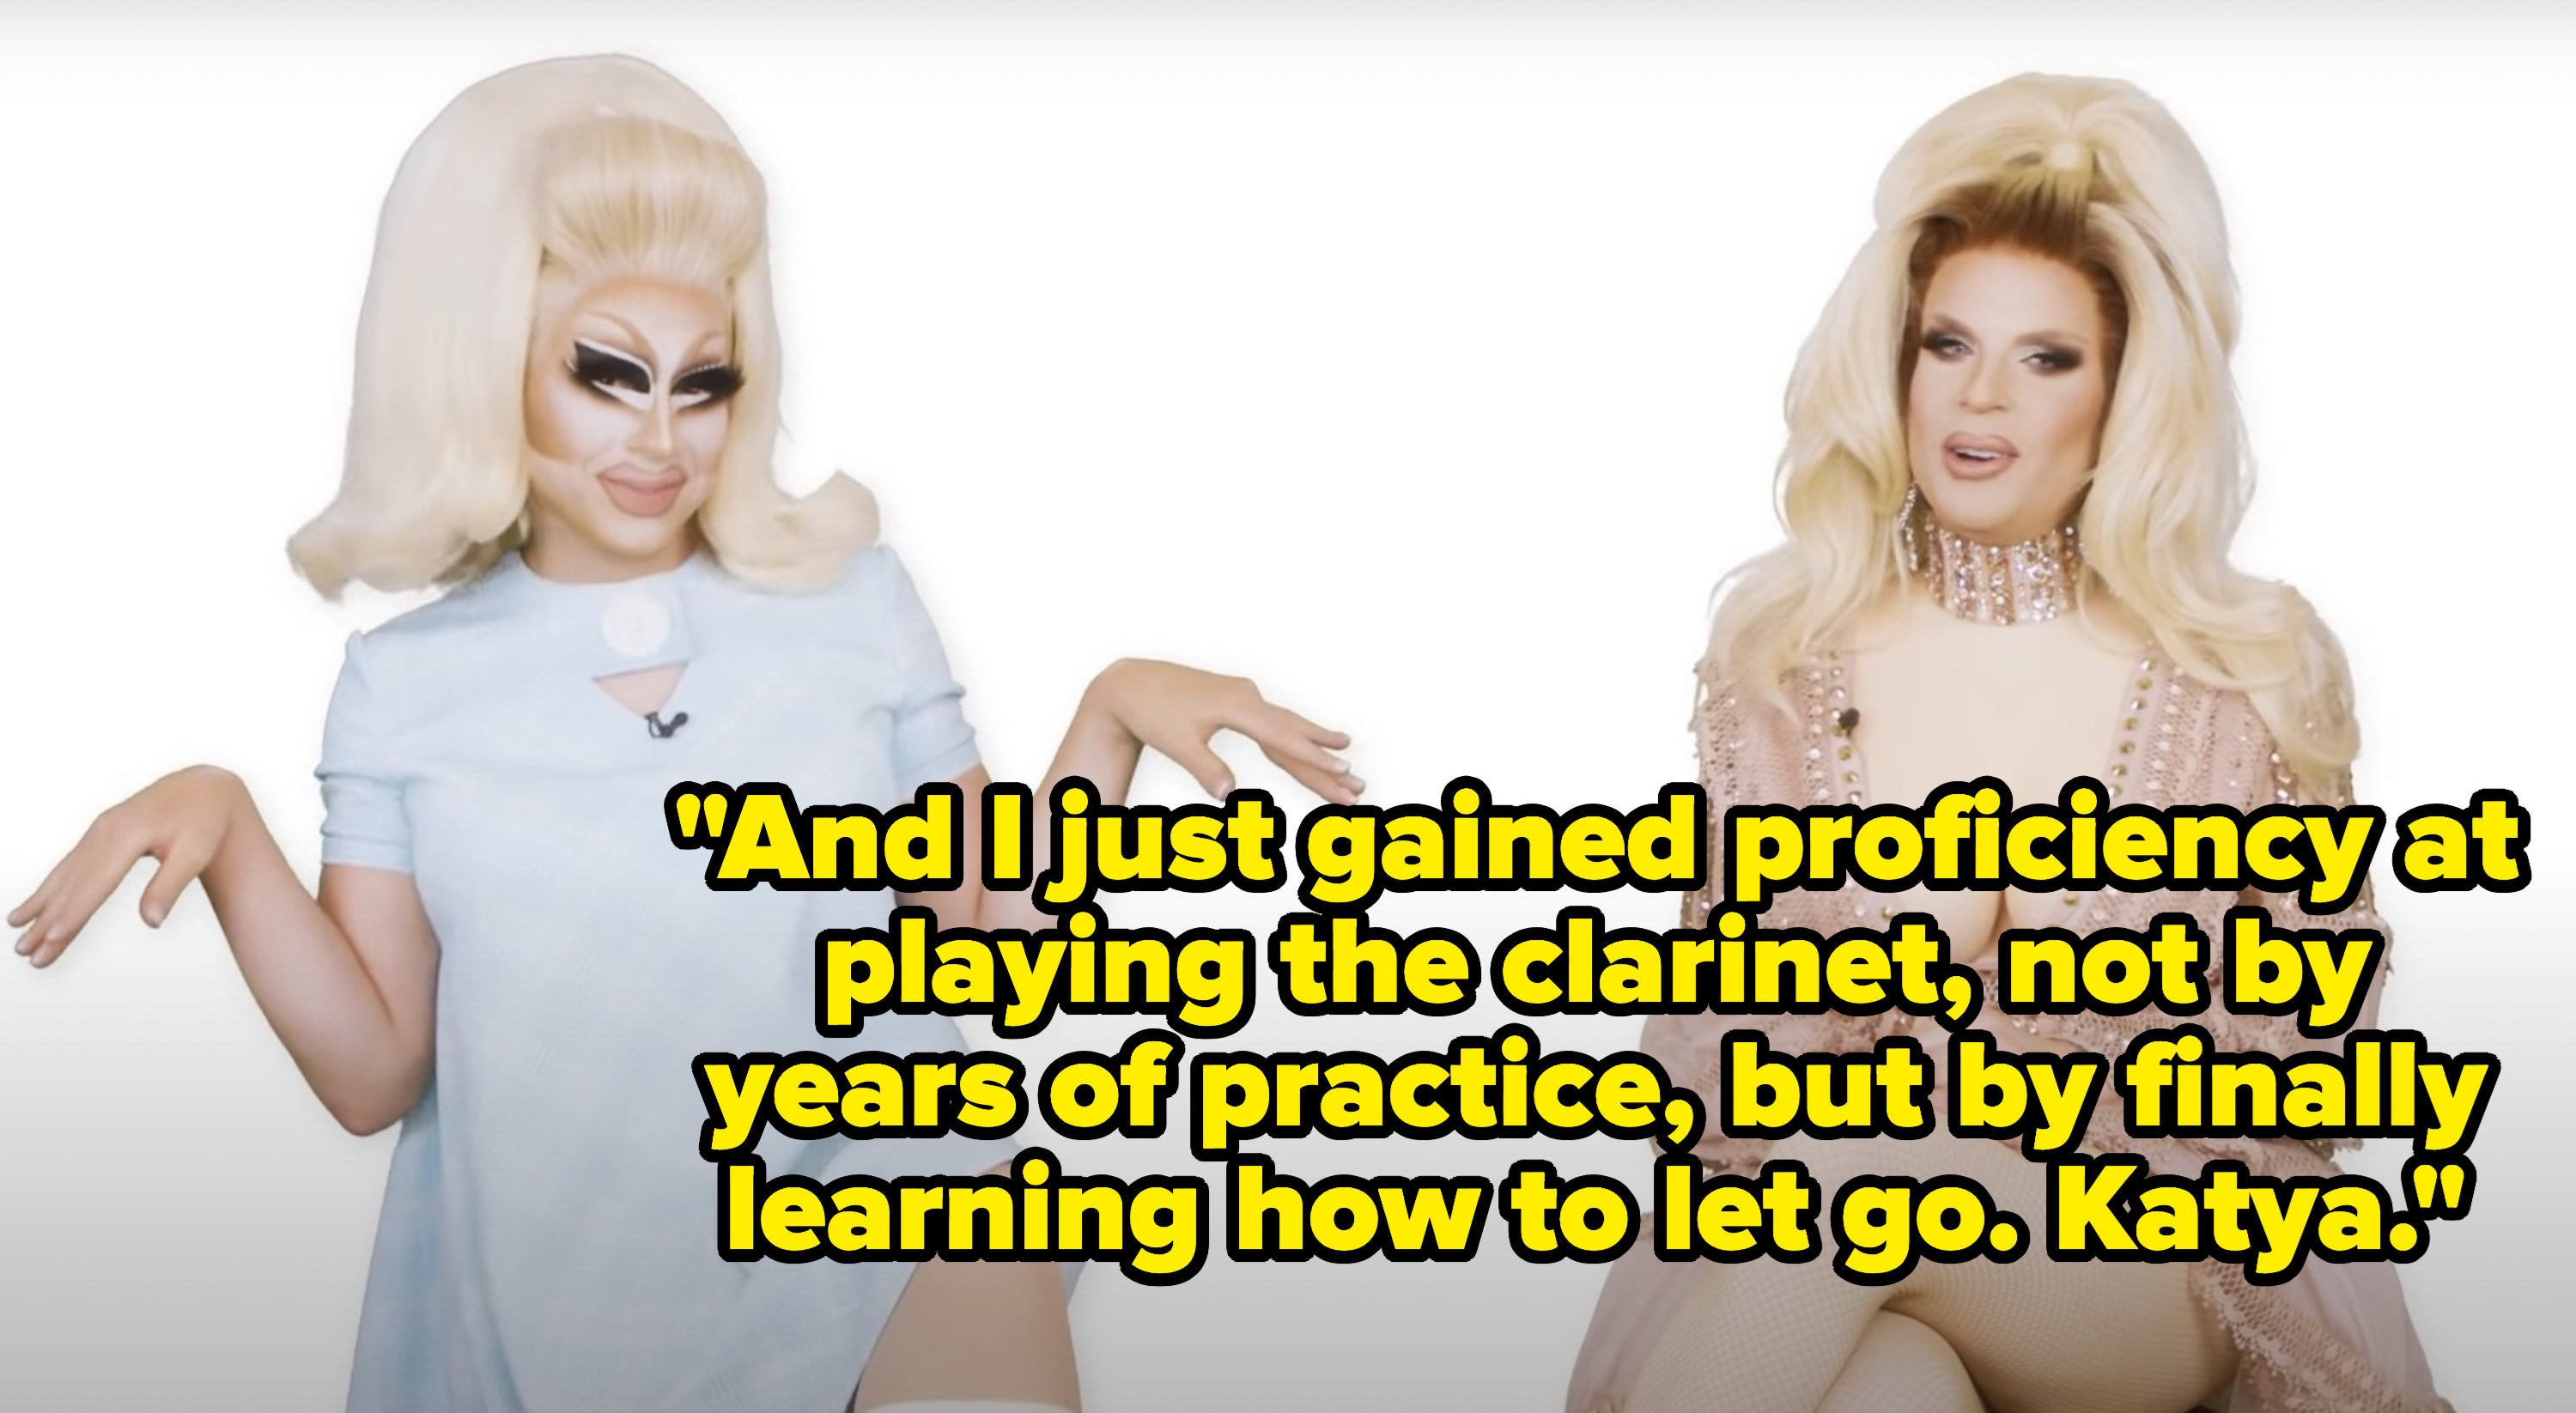 Katya says, And I just gained proficiency at playing the clarinet, not by years of practice, but by finally learning how to let go, Katya